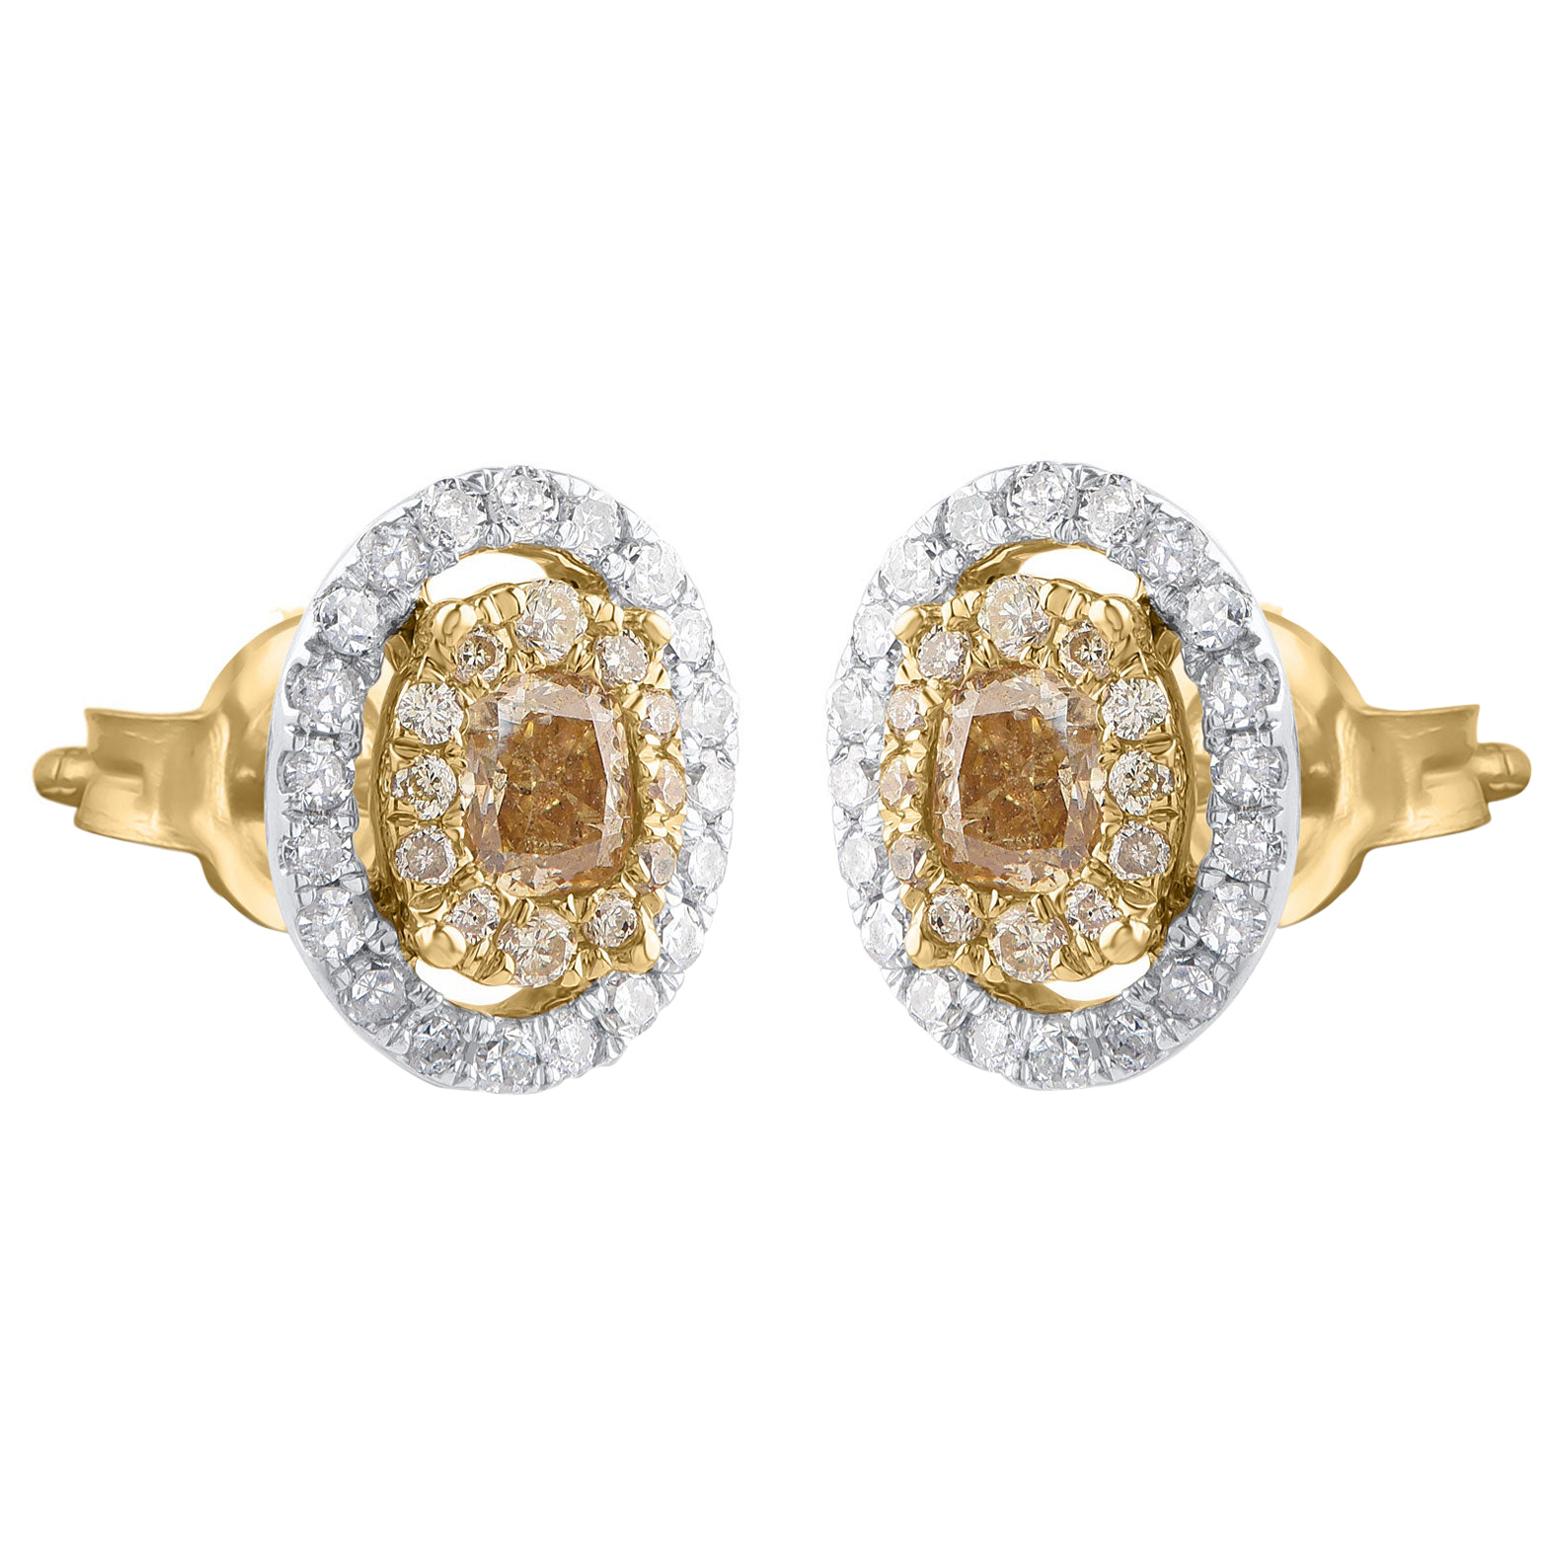 These diamond accented stud earrings are crafted in 14 karat yellow gold and embedded with 40 White Diamonds, 24 Natural Yellow and 2 center stone Natural Yellow Cushion Cut diamonds beautifully set in micro-prong setting. The diamonds are graded